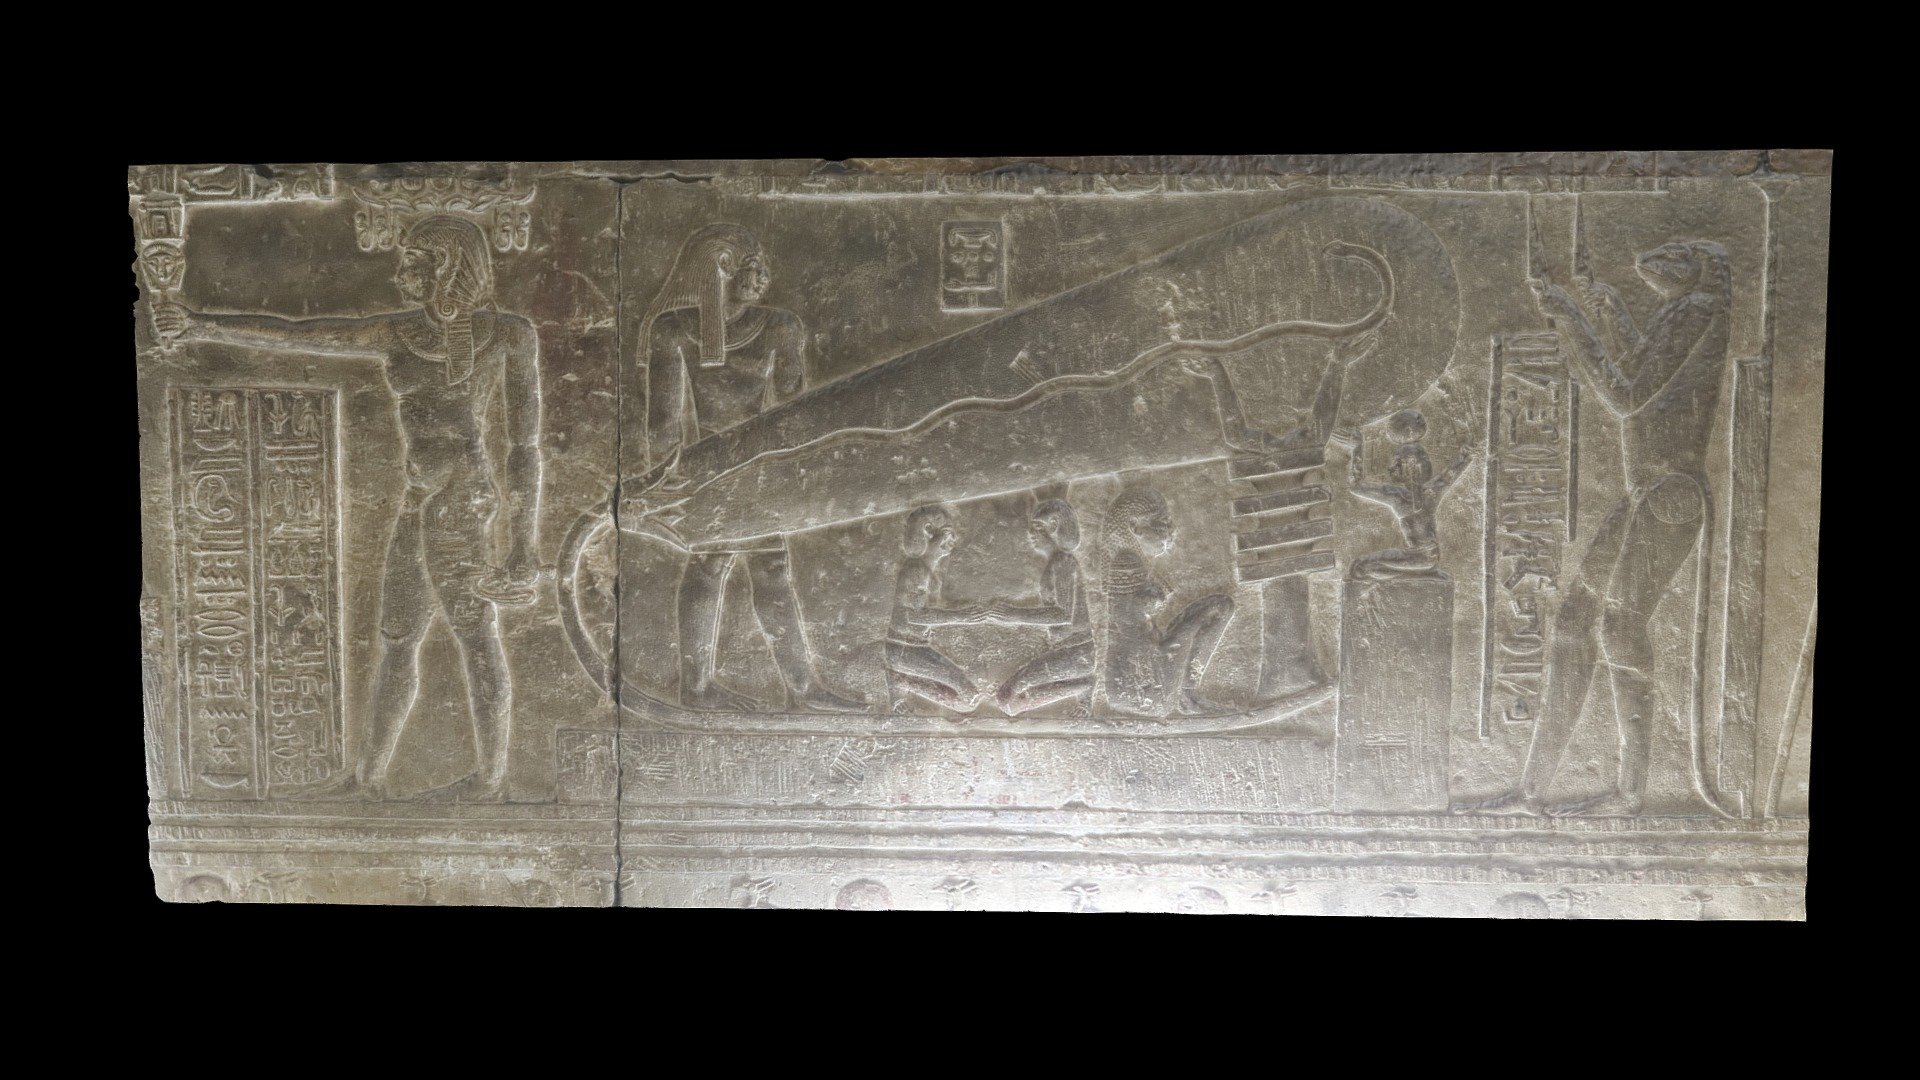 This relief carving is in one of the crypts at Dendera Temple, Egypt and has been interpreted by various fringe or conspiracy theorists and &ldquo;alternate